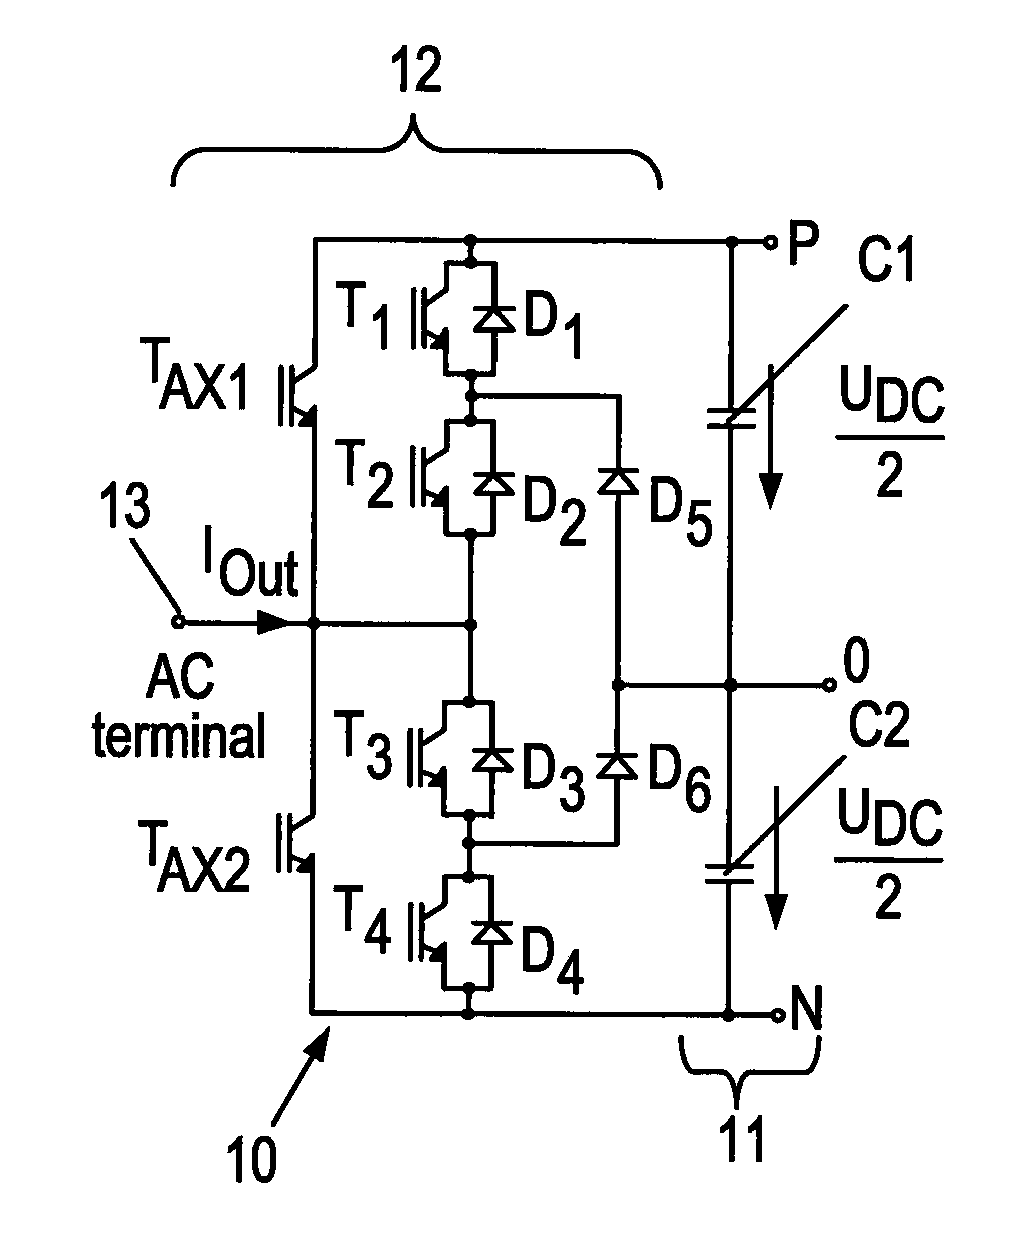 Voltage source converter (VSC) with neutral-point-clamped (NPC) topology and method for operating such voltage source converter